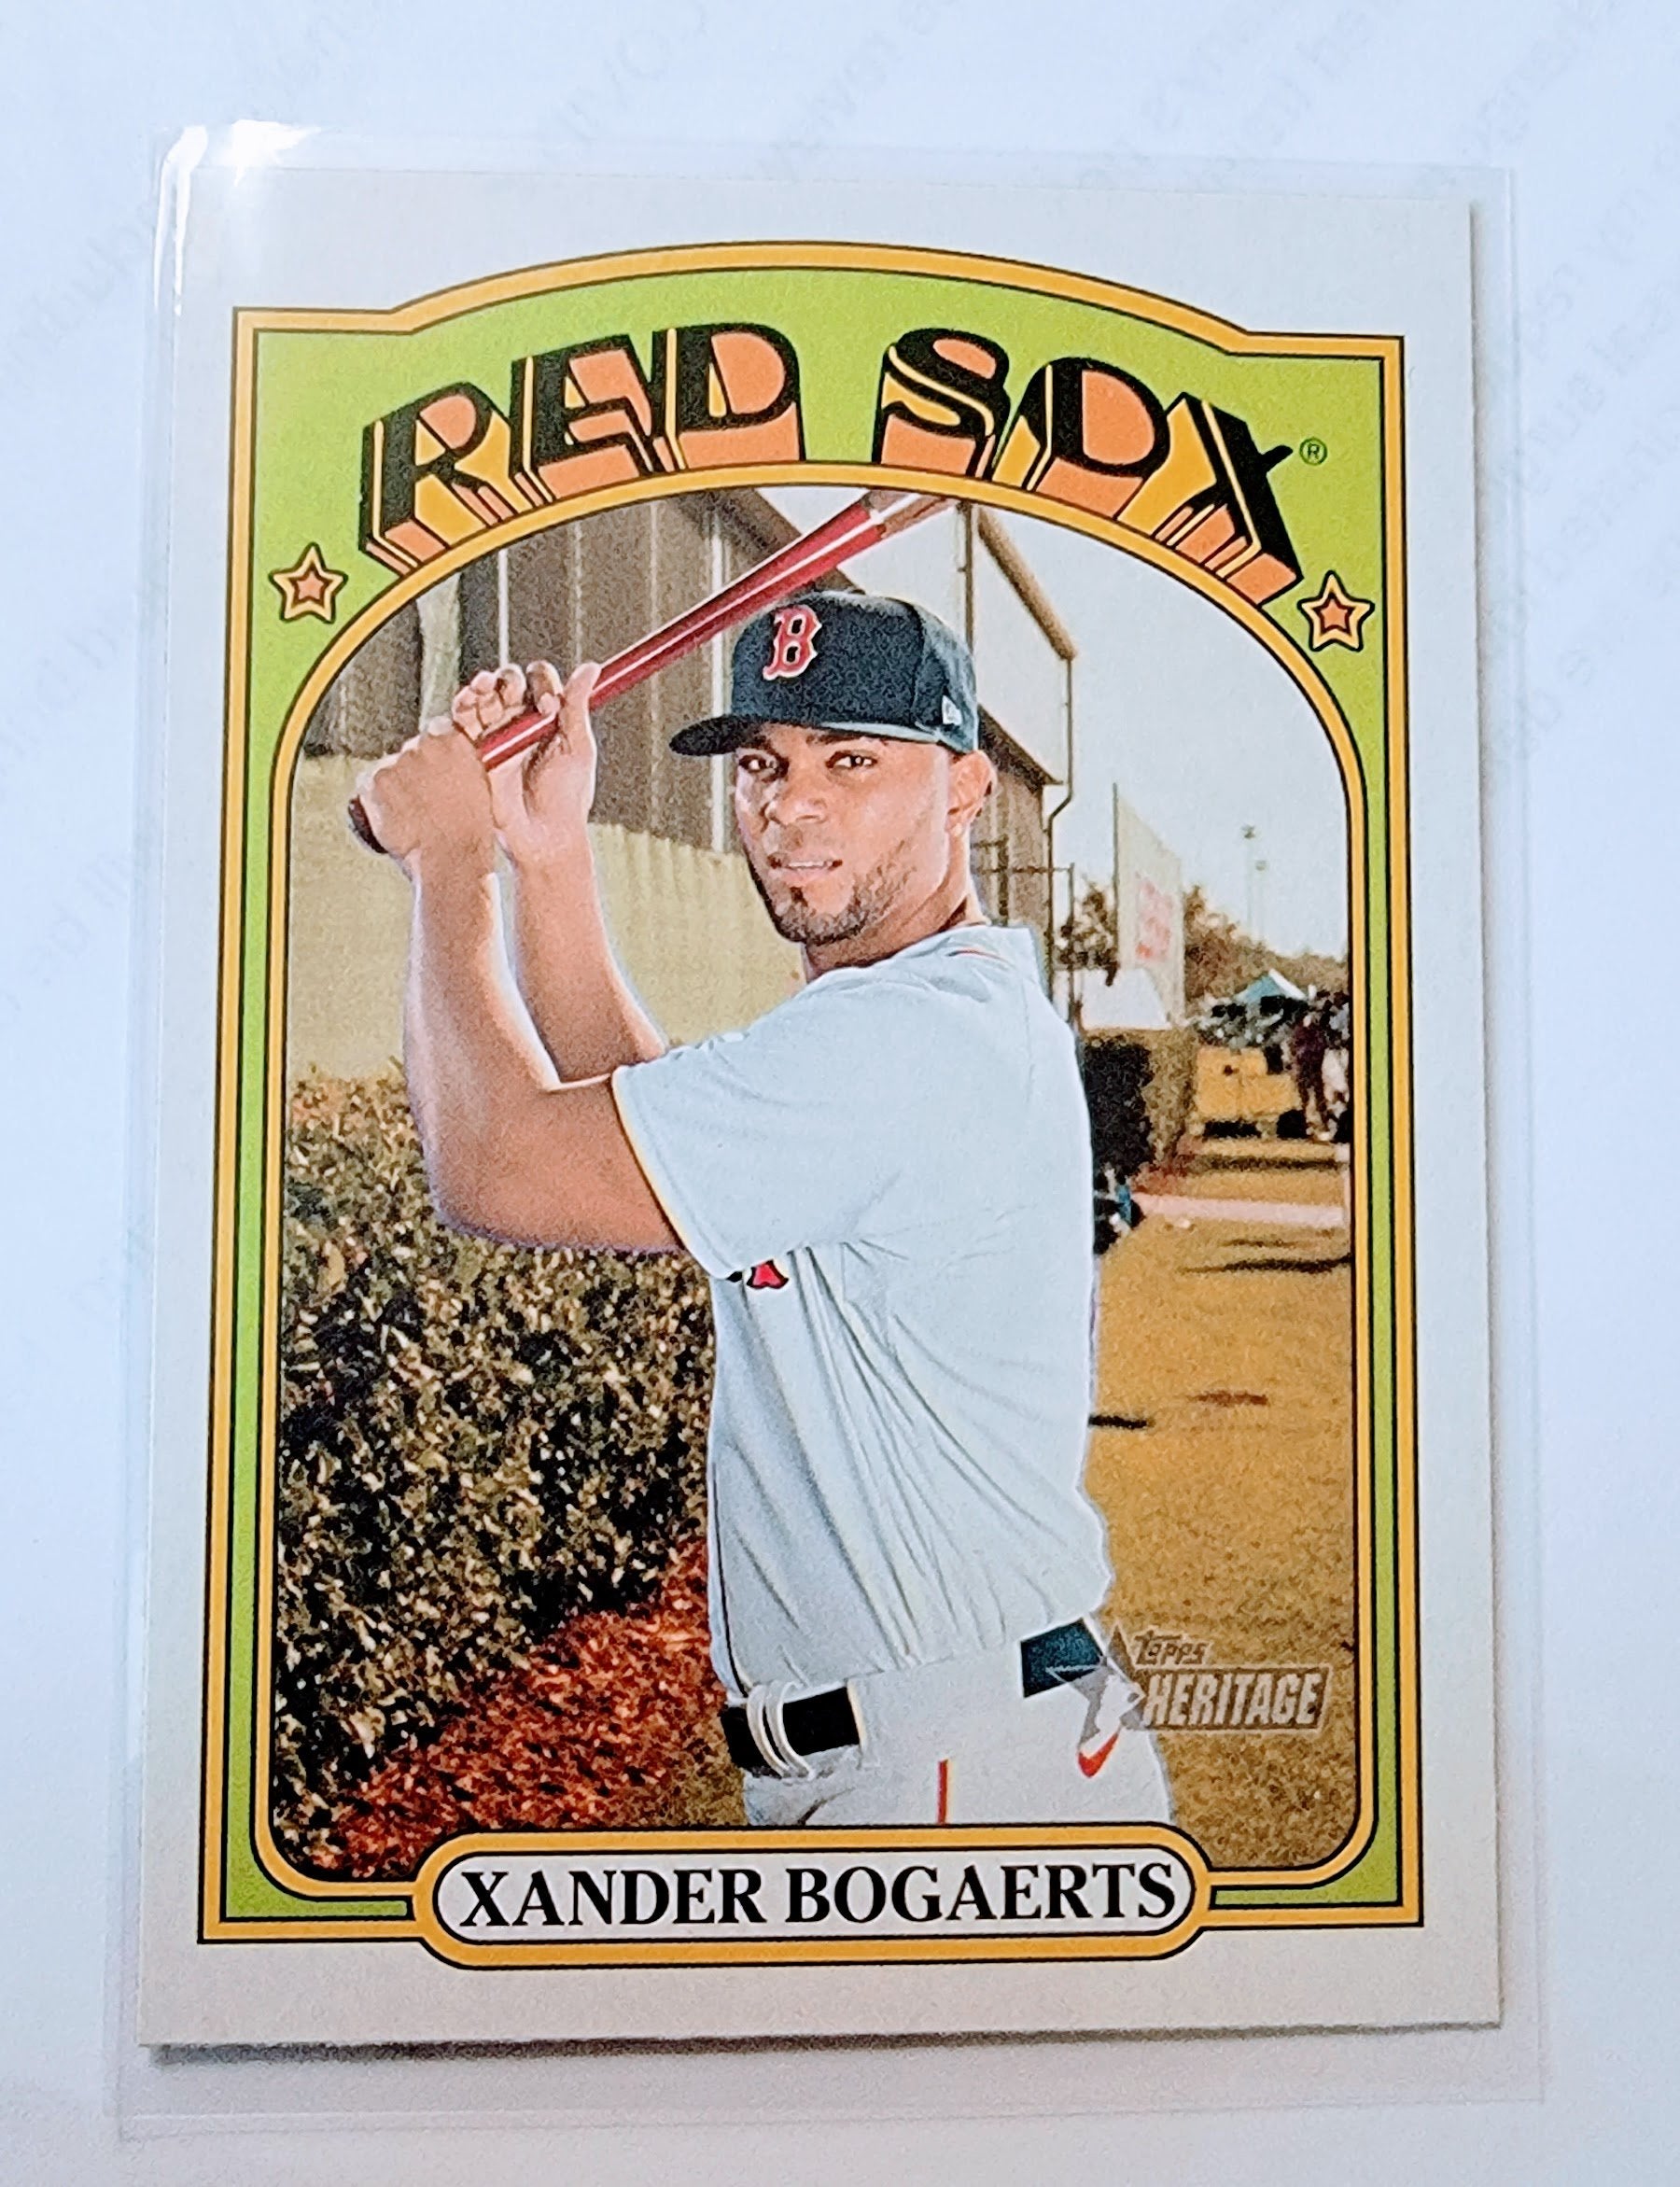 2021 Topps Heritage Xander Bogaerts Baseball Trading Card MCSC1 simple Xclusive Collectibles   